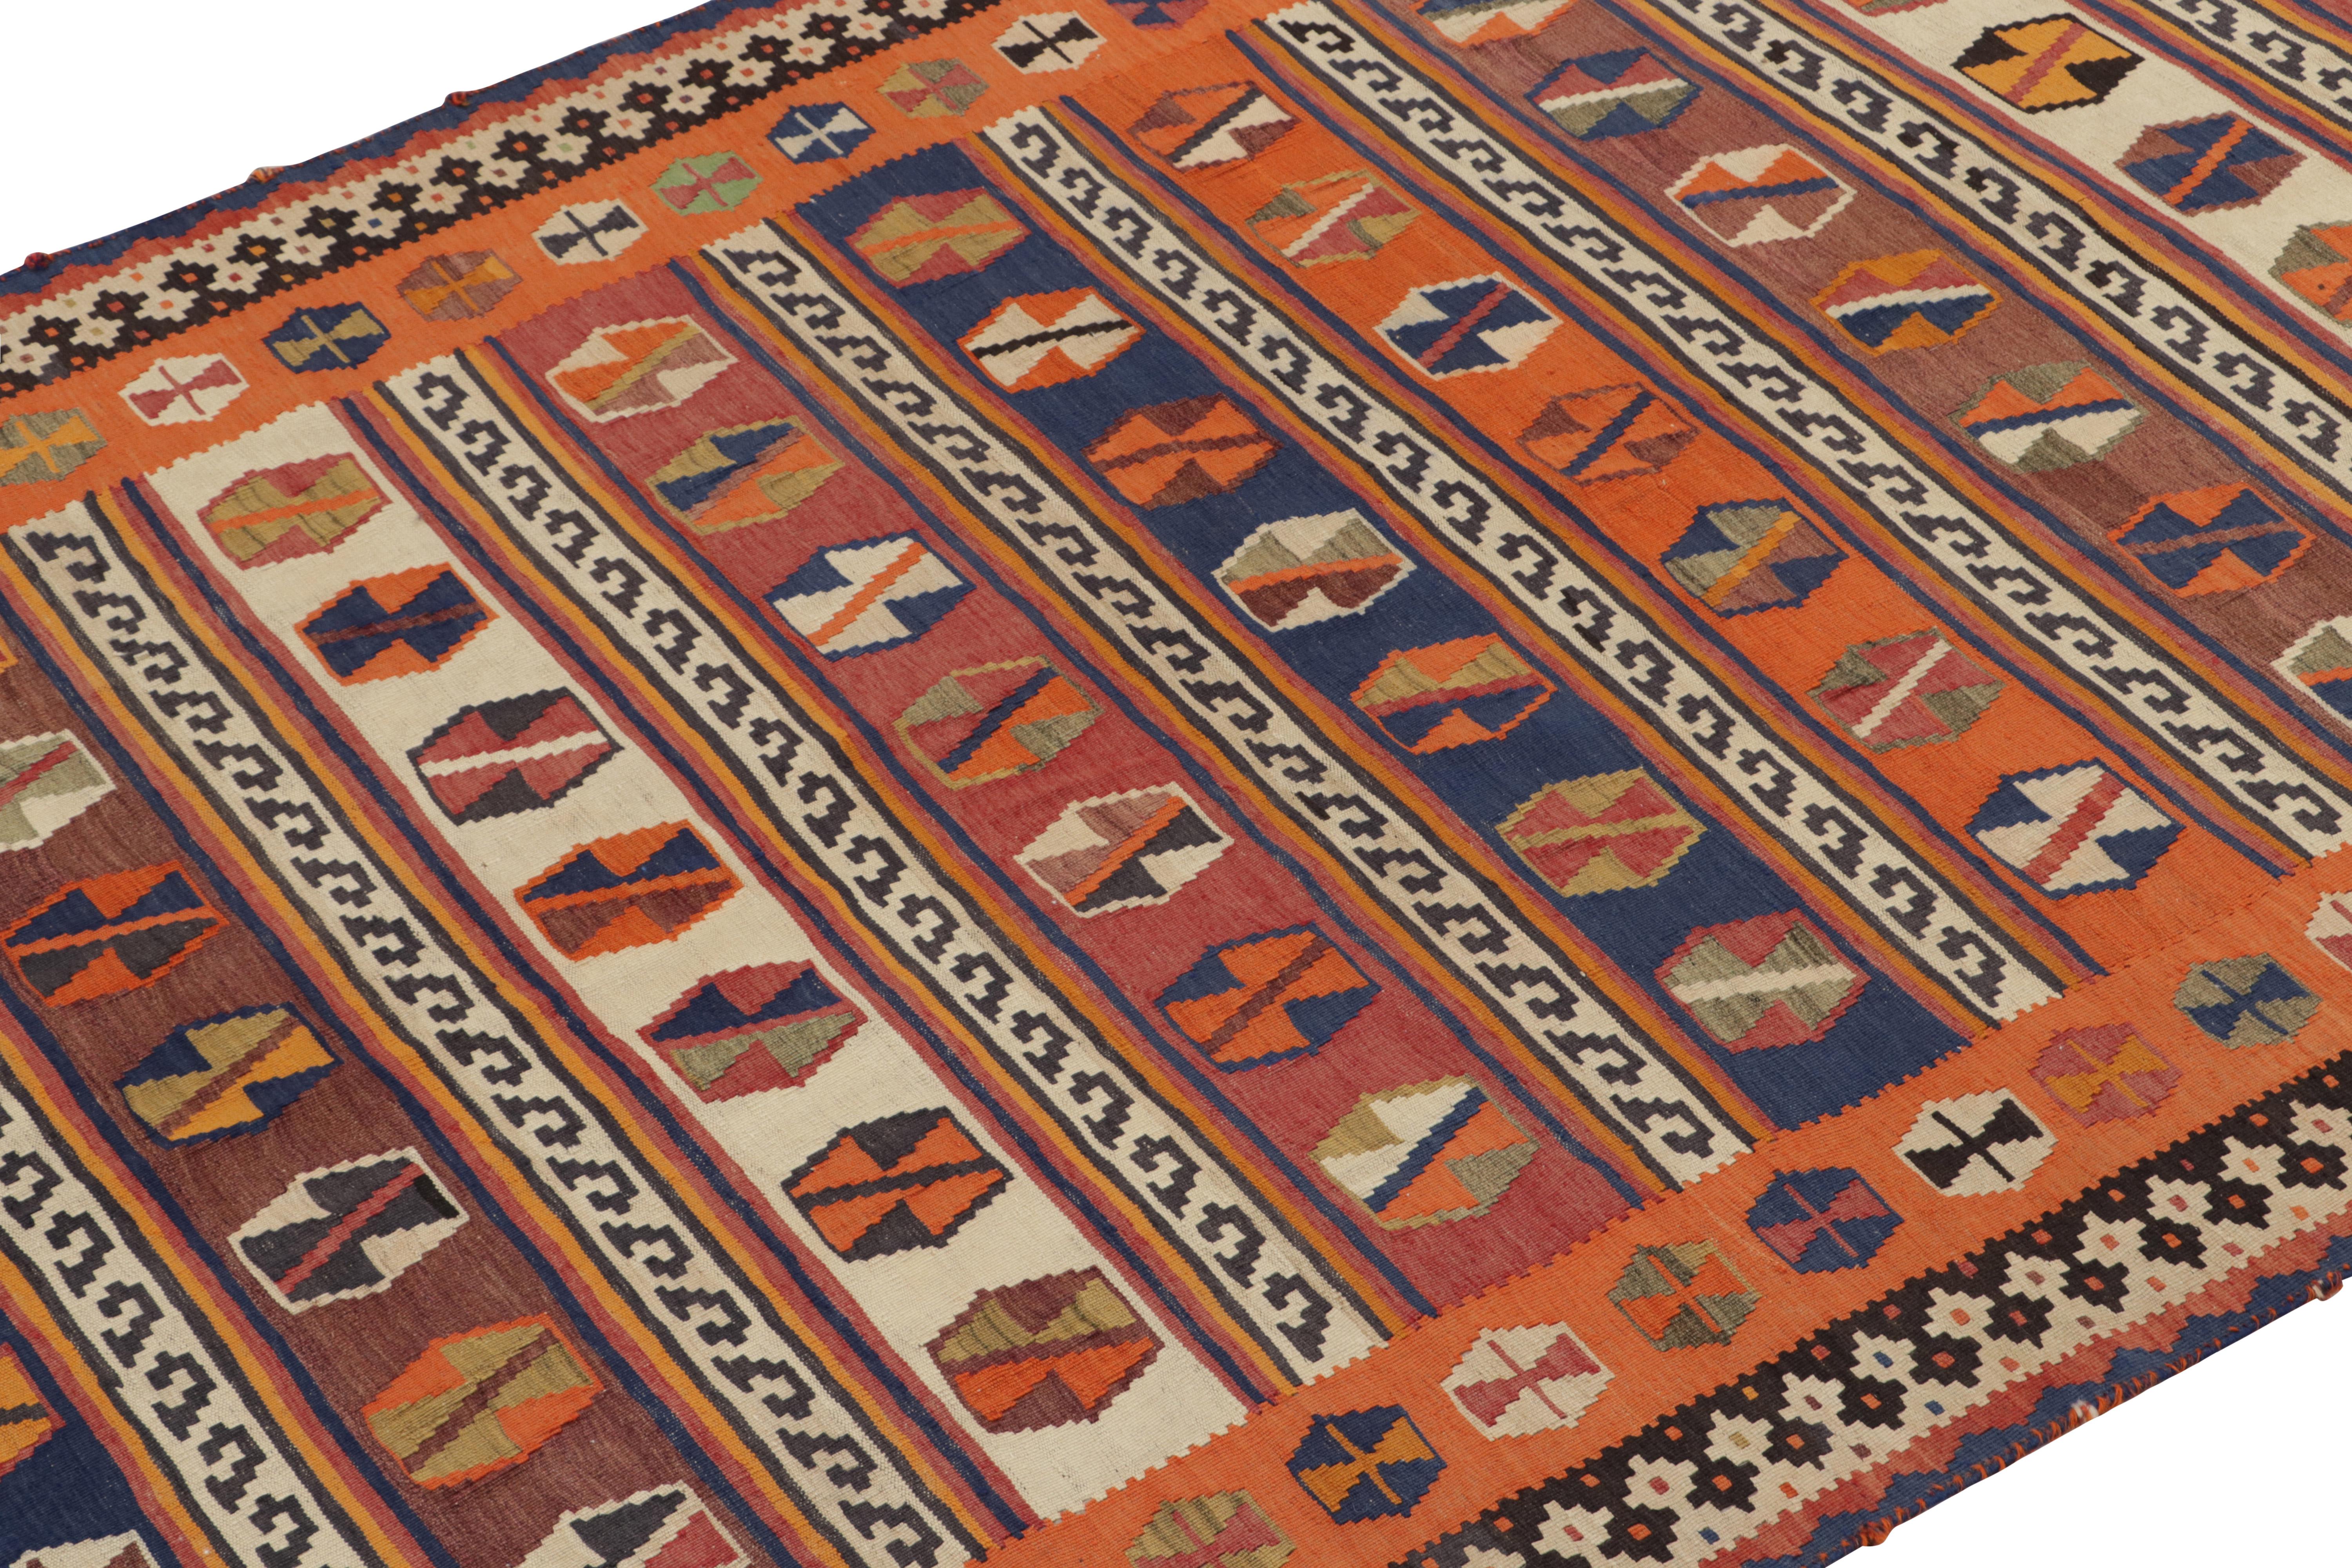 Hand-Knotted Vintage Qashqai Persian Kilim in Orange with Geometric Patterns For Sale